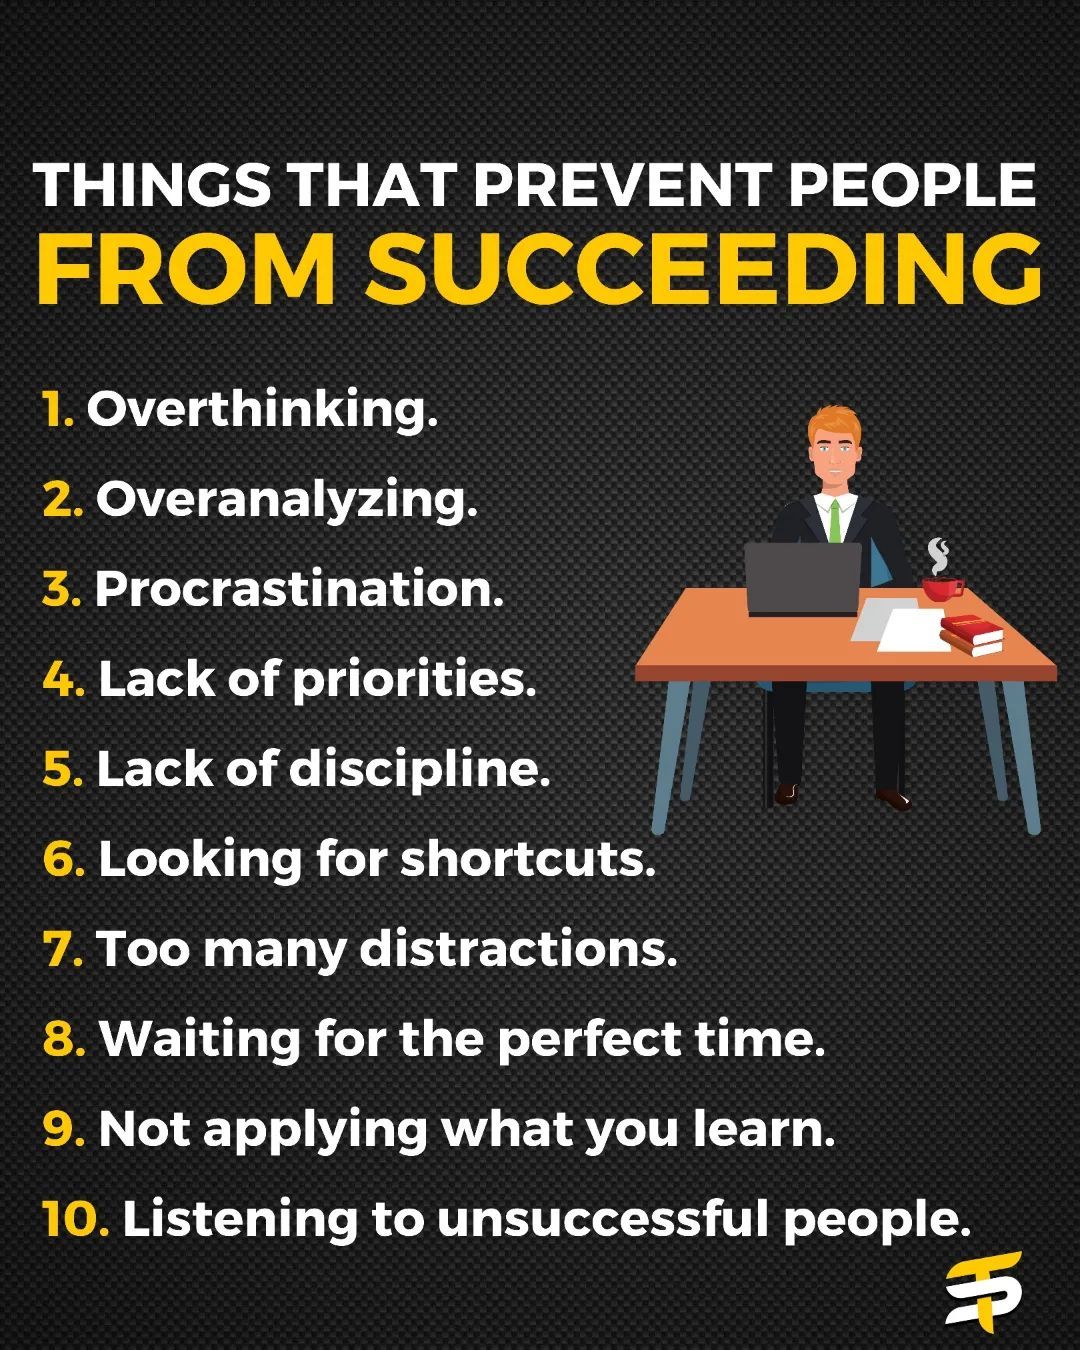 Things that prevent people from succeeding